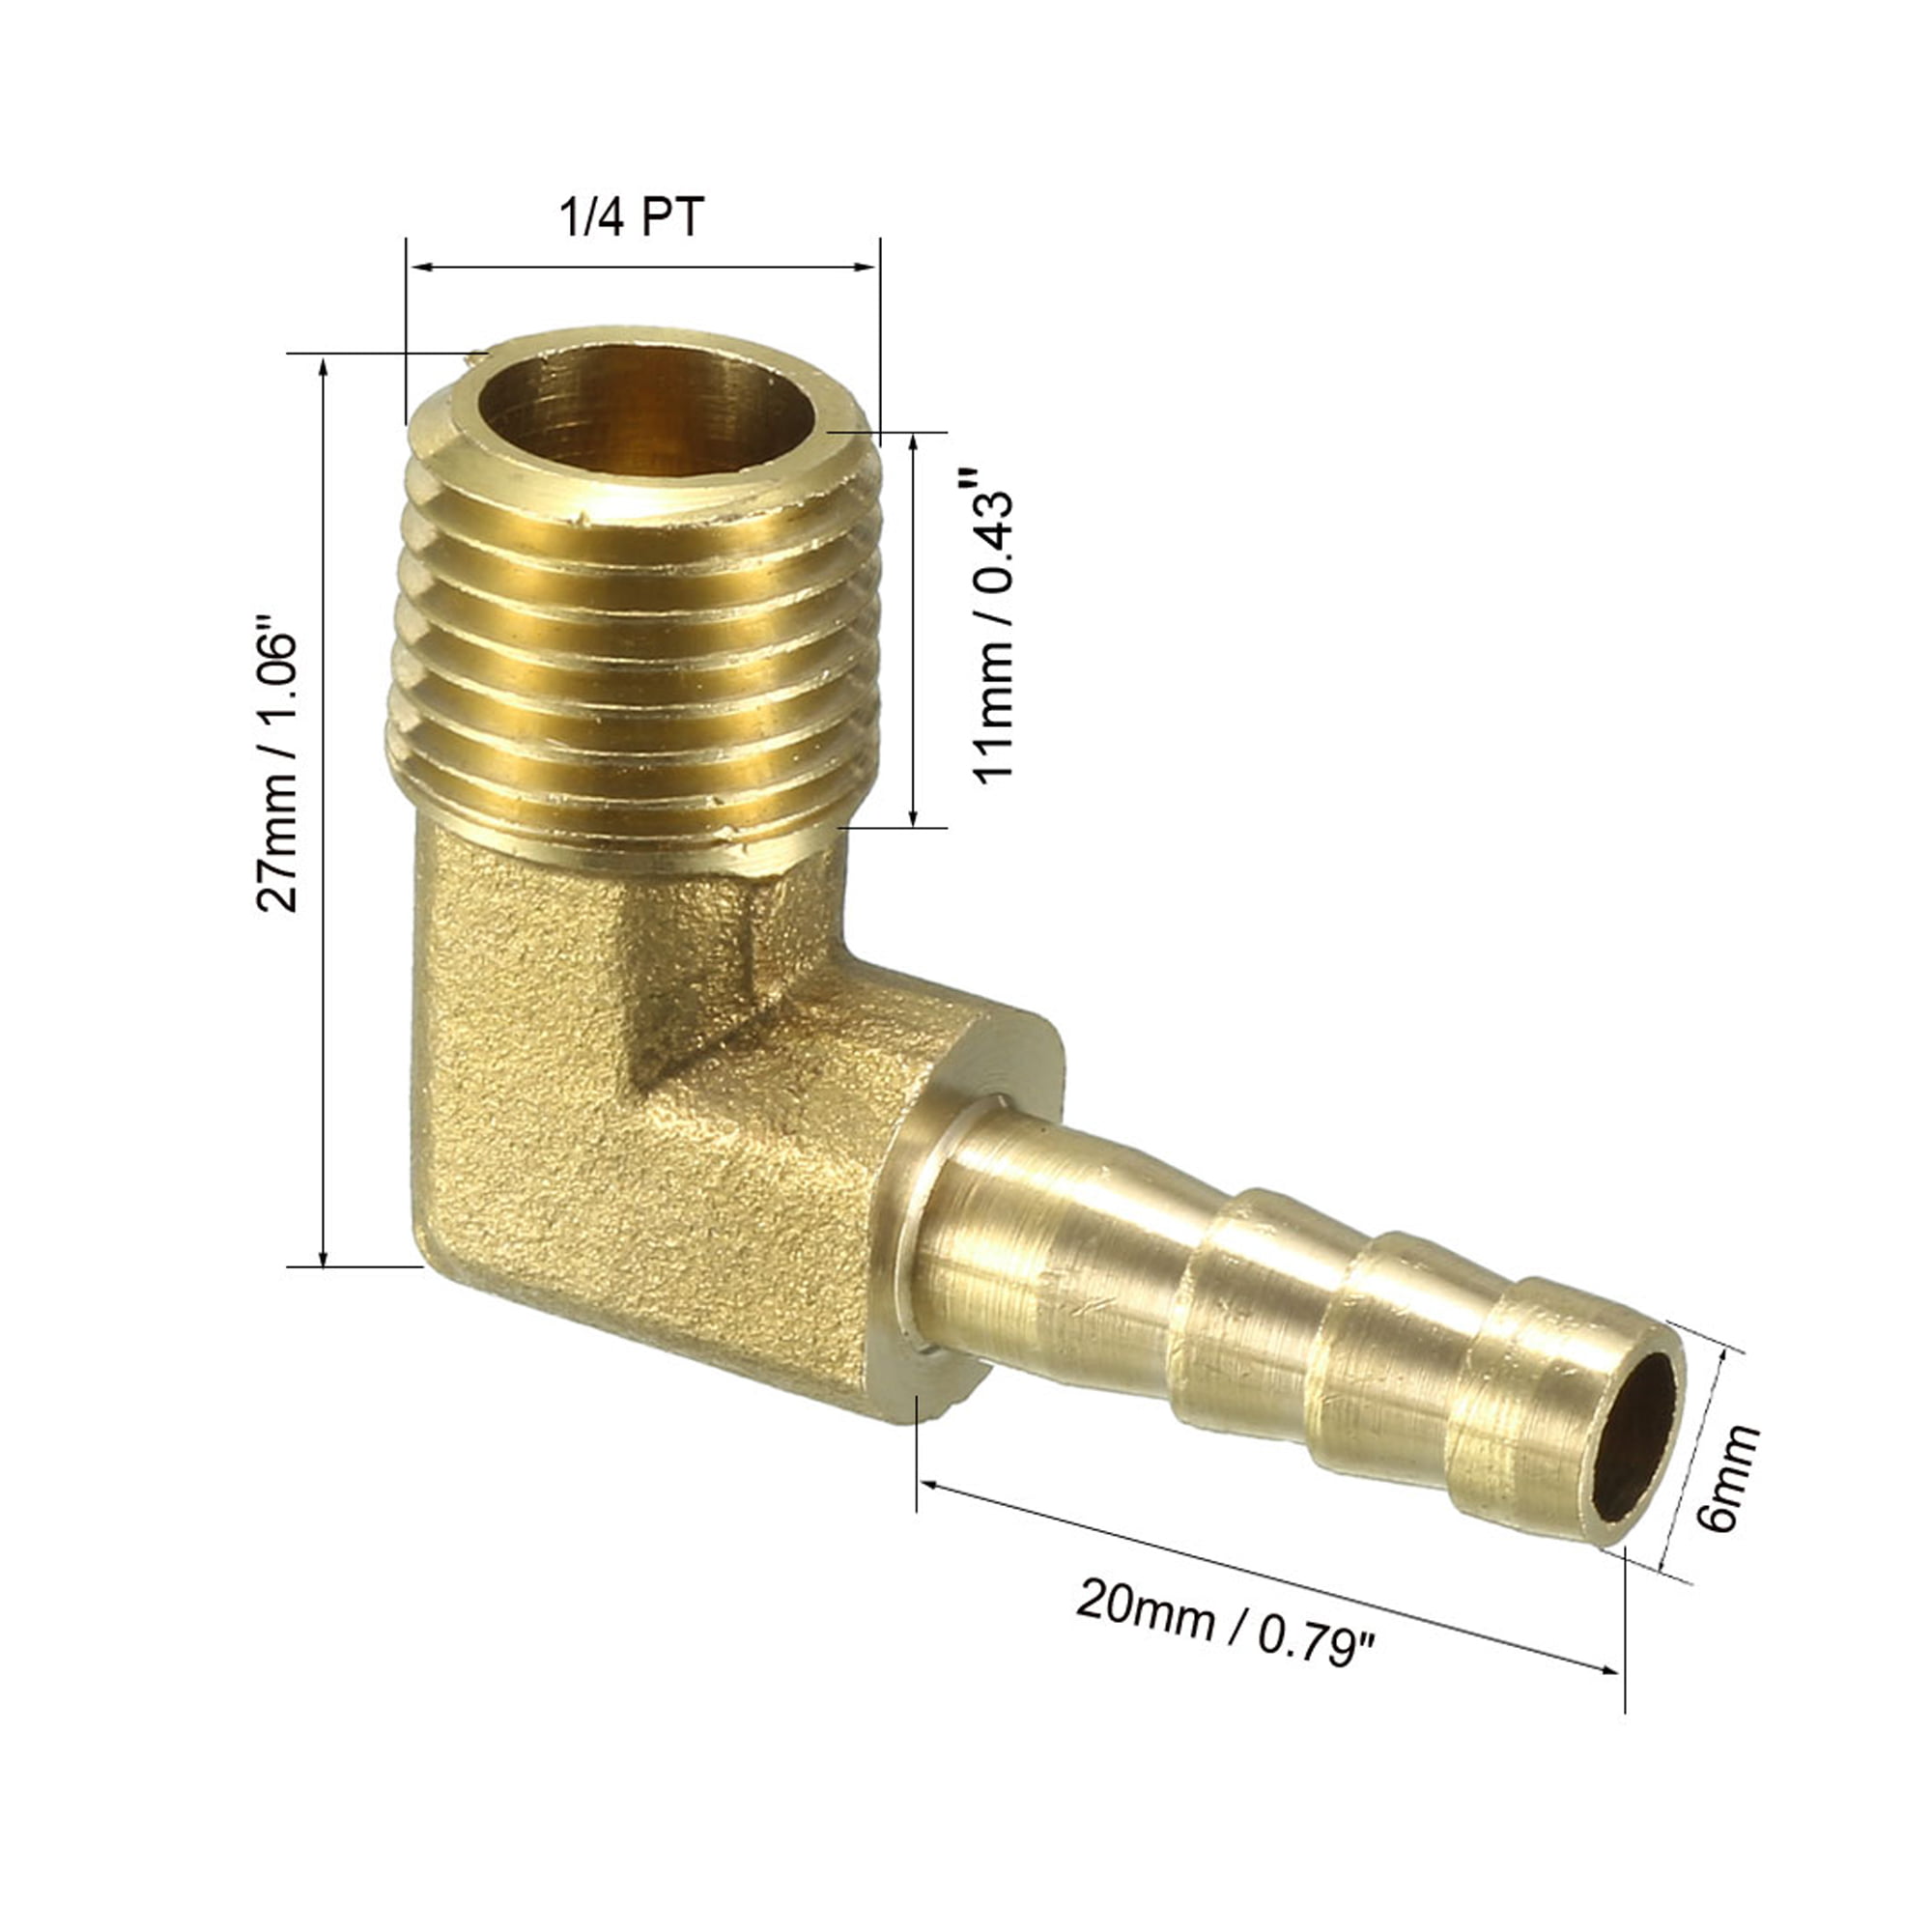 Othmro Hose Barb 11PCS 8mm Hose T-Shaped 3 Ways Air Gas Brass Barb Fitting Connector Gold Tone